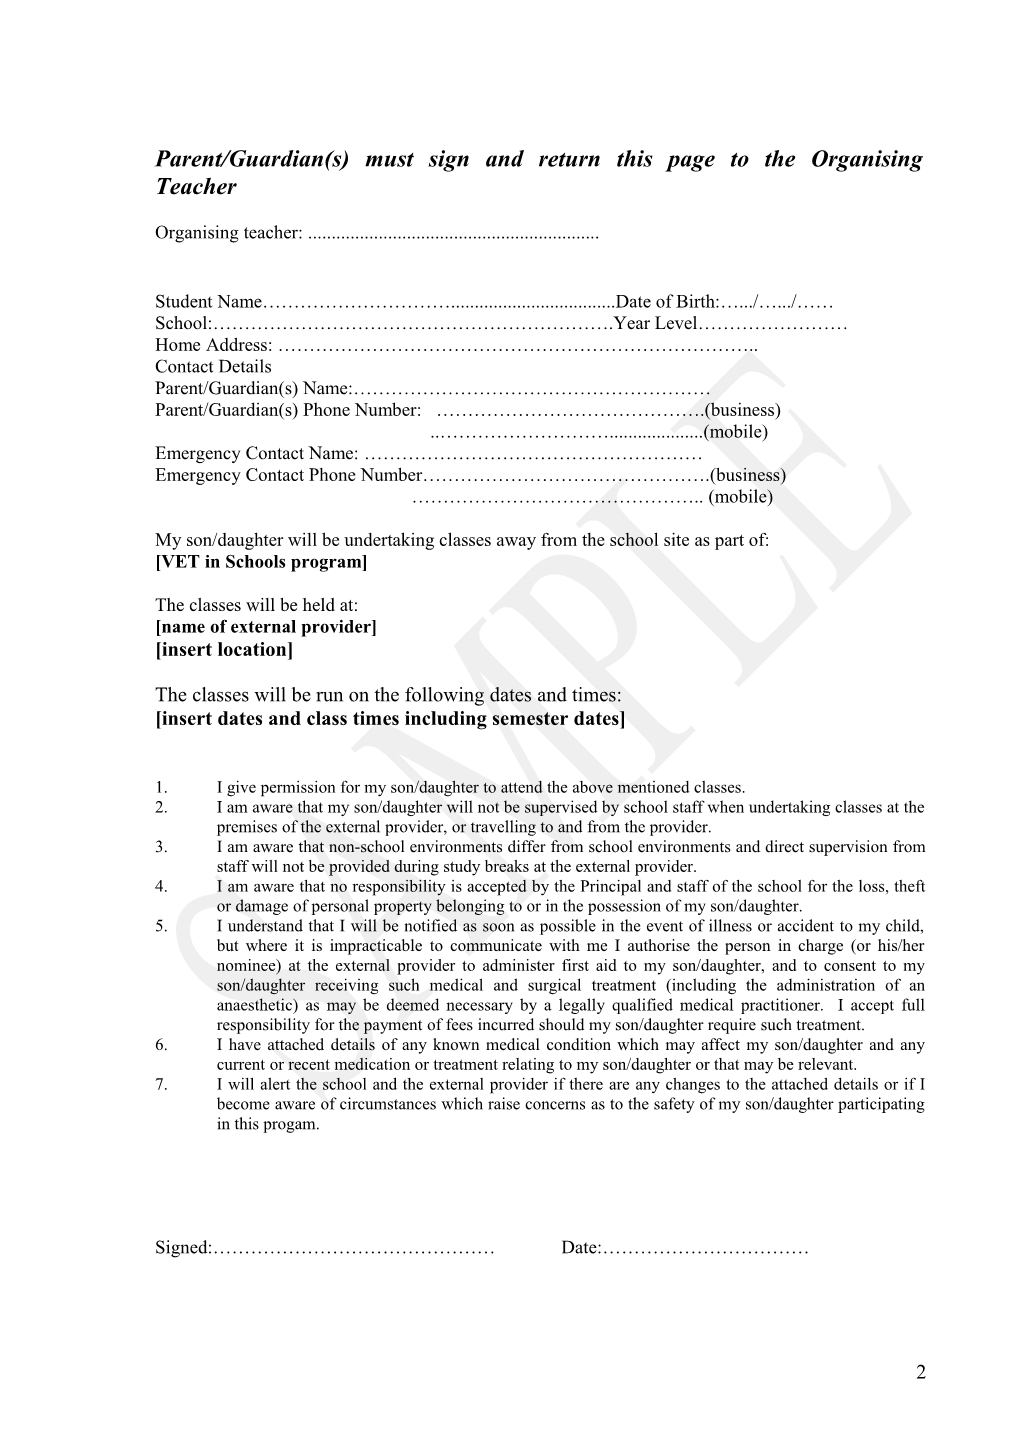 Parent Consent Form for Participation in a VET in Schools Program with an External Provider